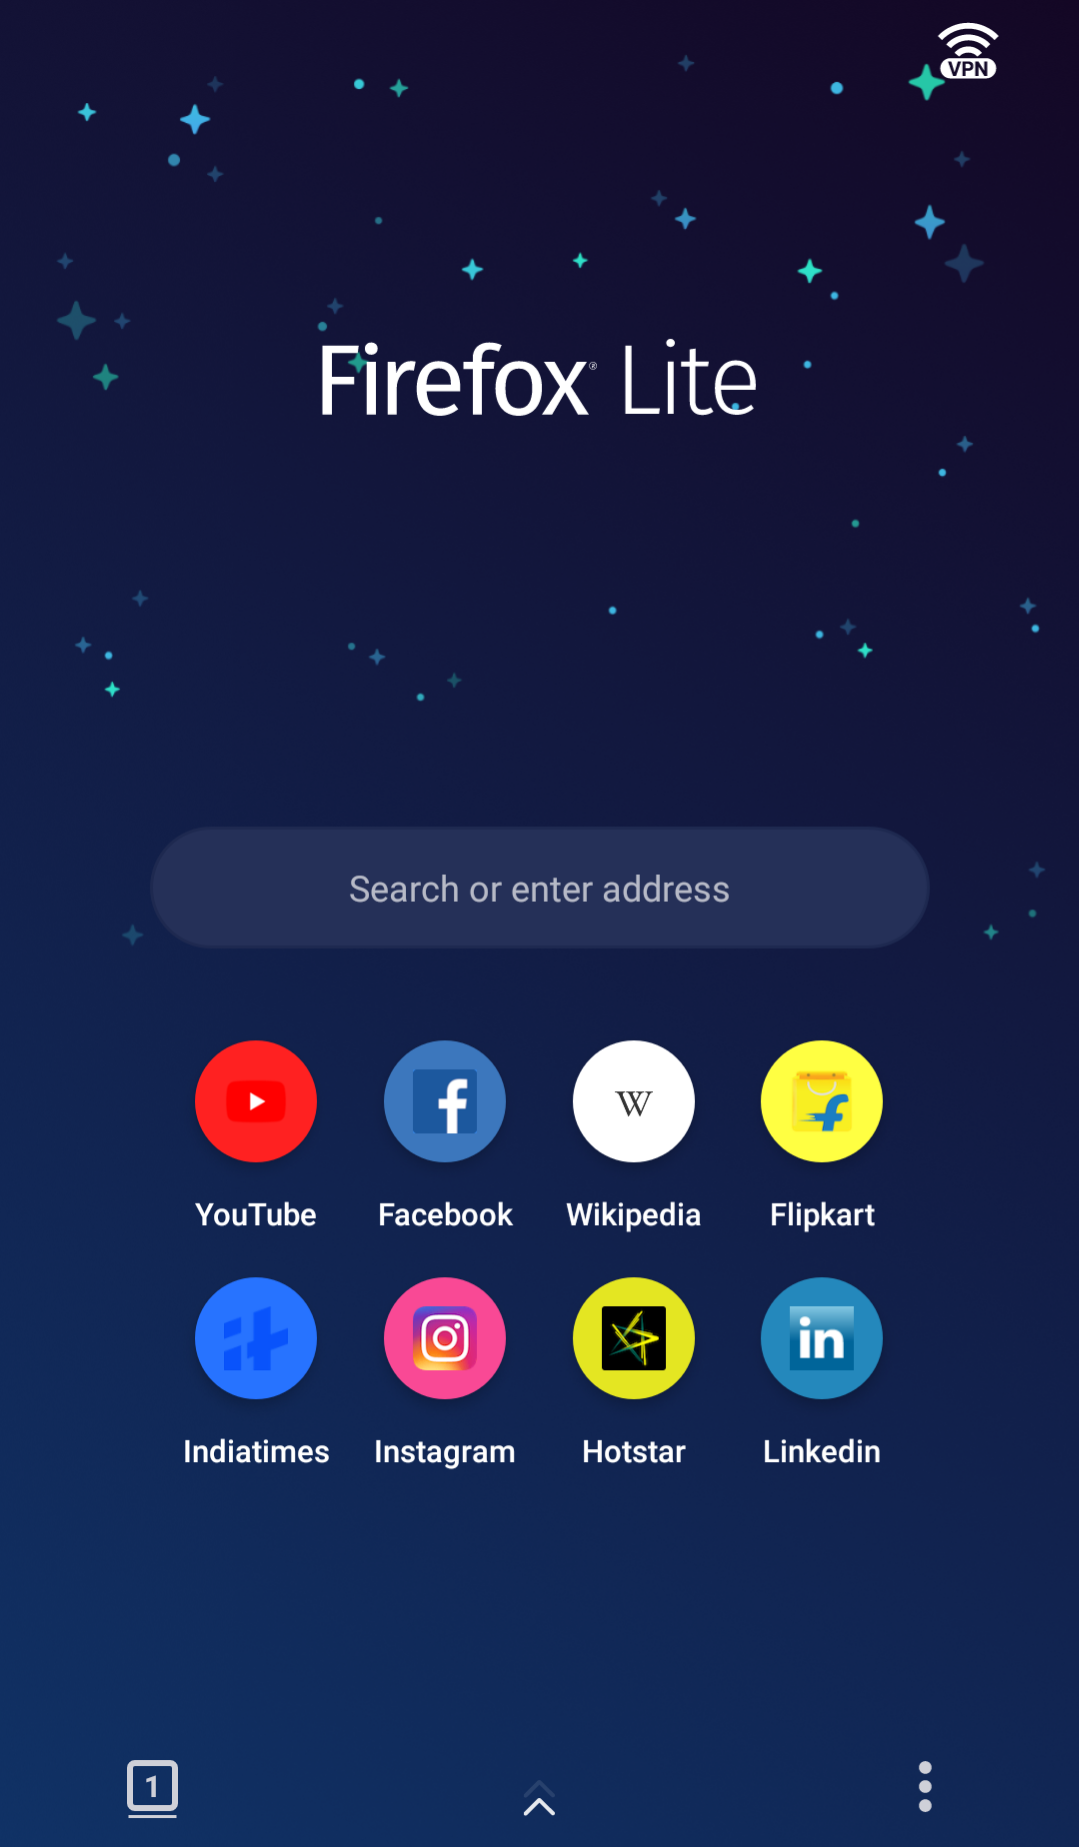 Firefox Lite is a lightweight alternative version of Firefox with shortcuts and a news feed